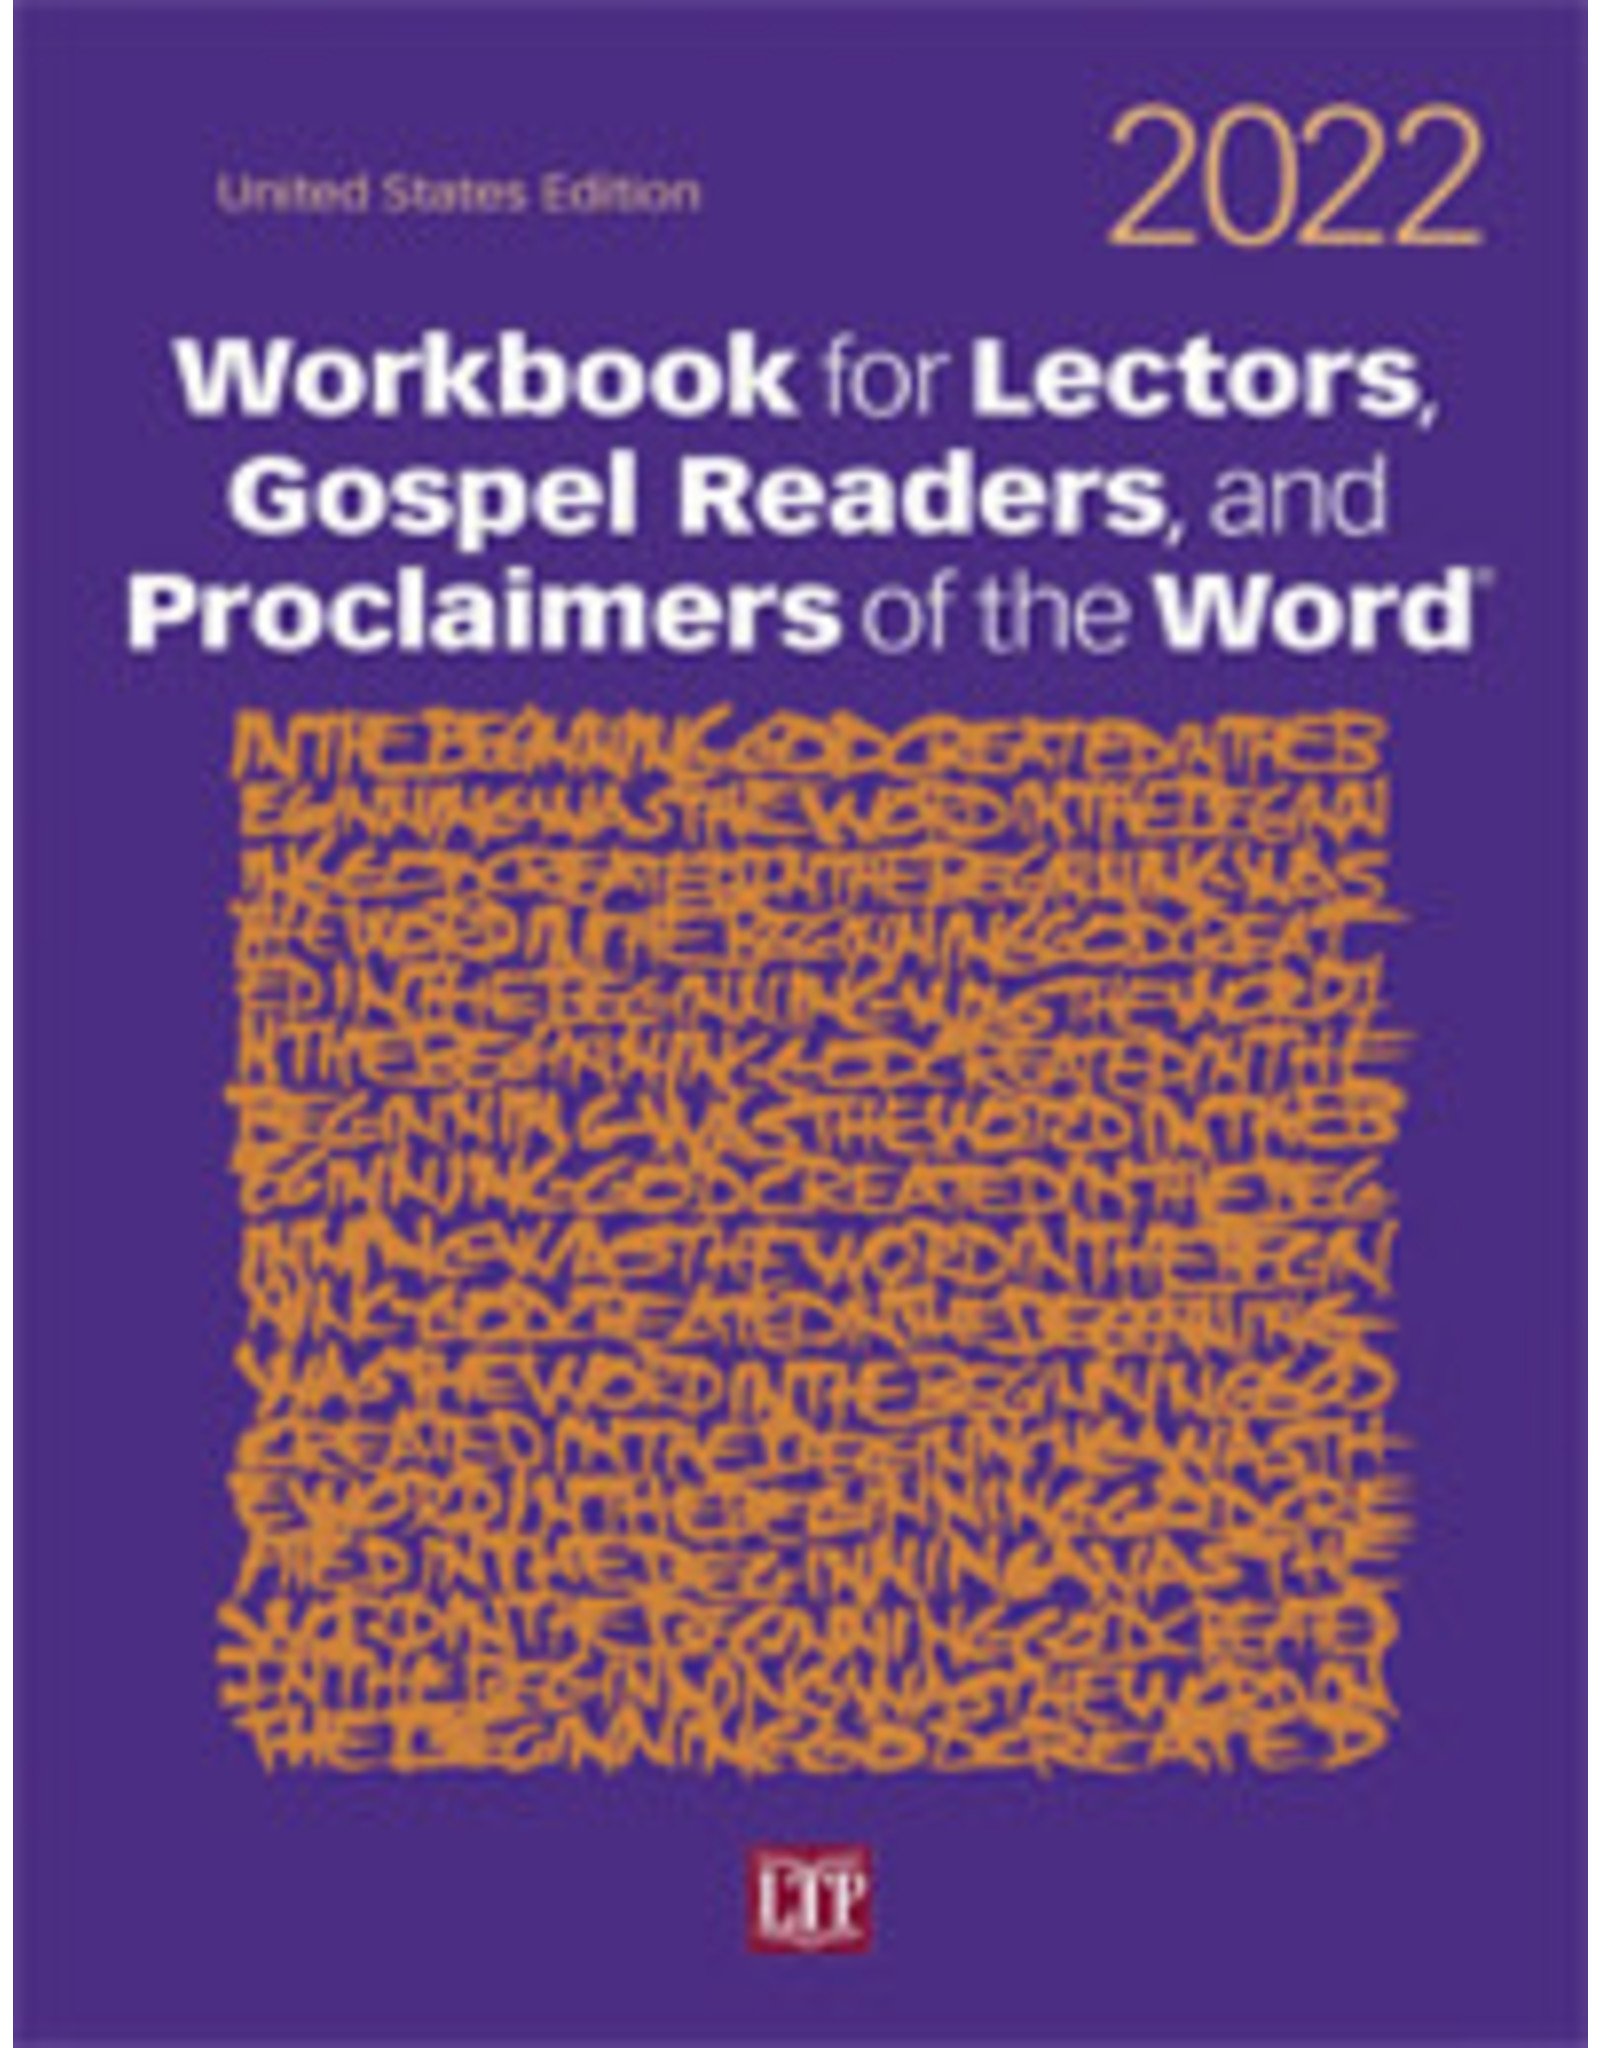 2022 Workbook for Lectors, Gospel Readers, & Proclaimers of the Word